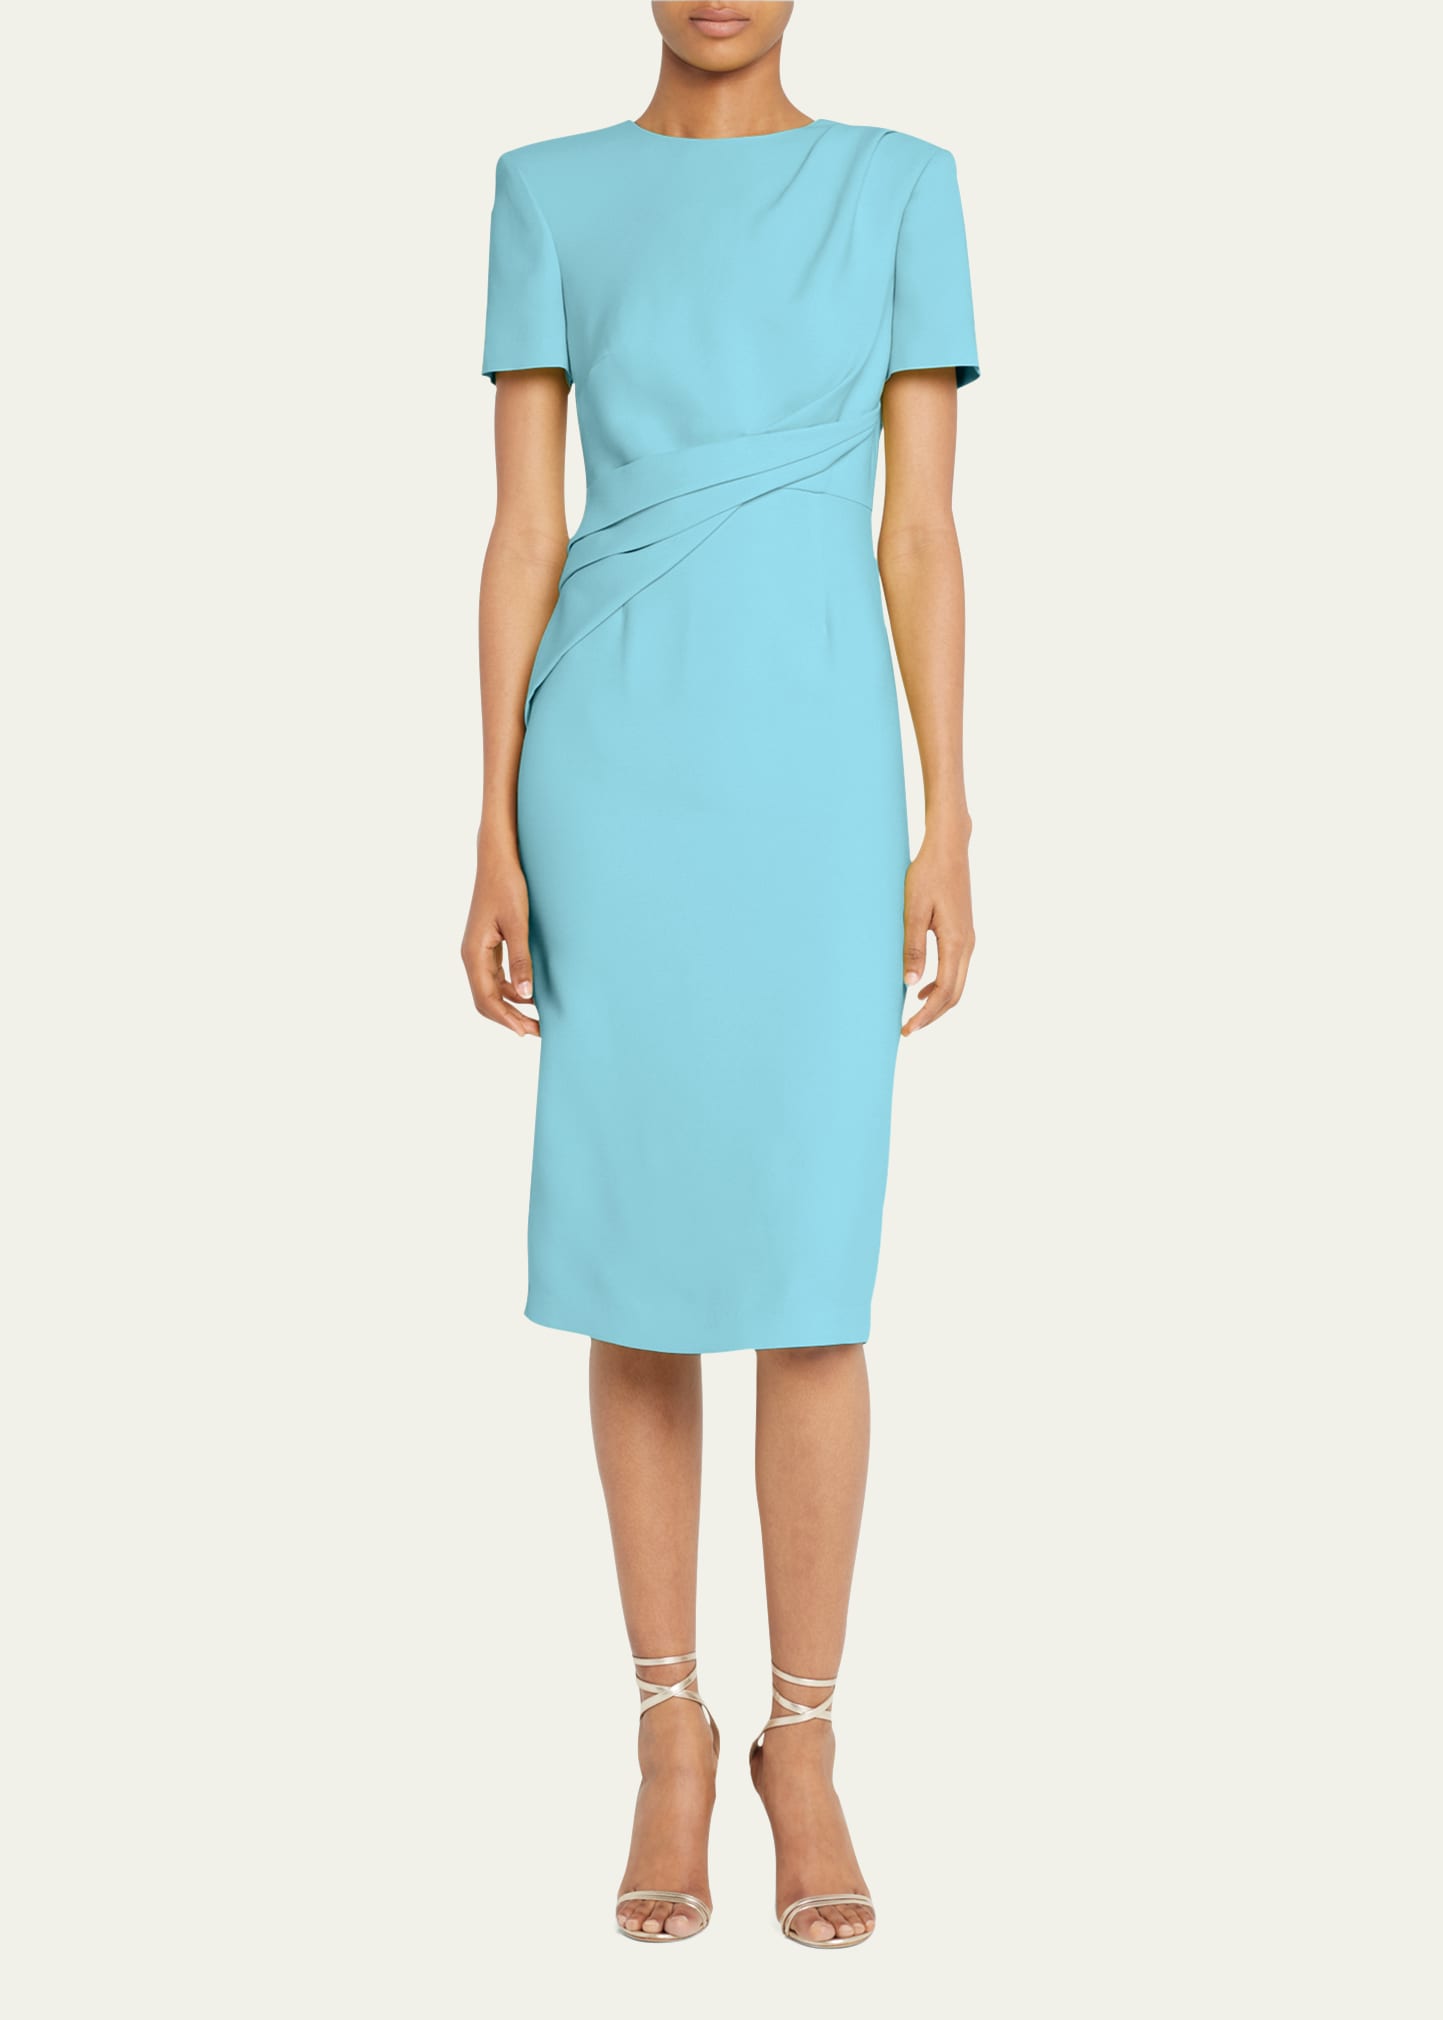 ROLAND MOURET SILK MIDI DRESS WITH PLEATED FRONT